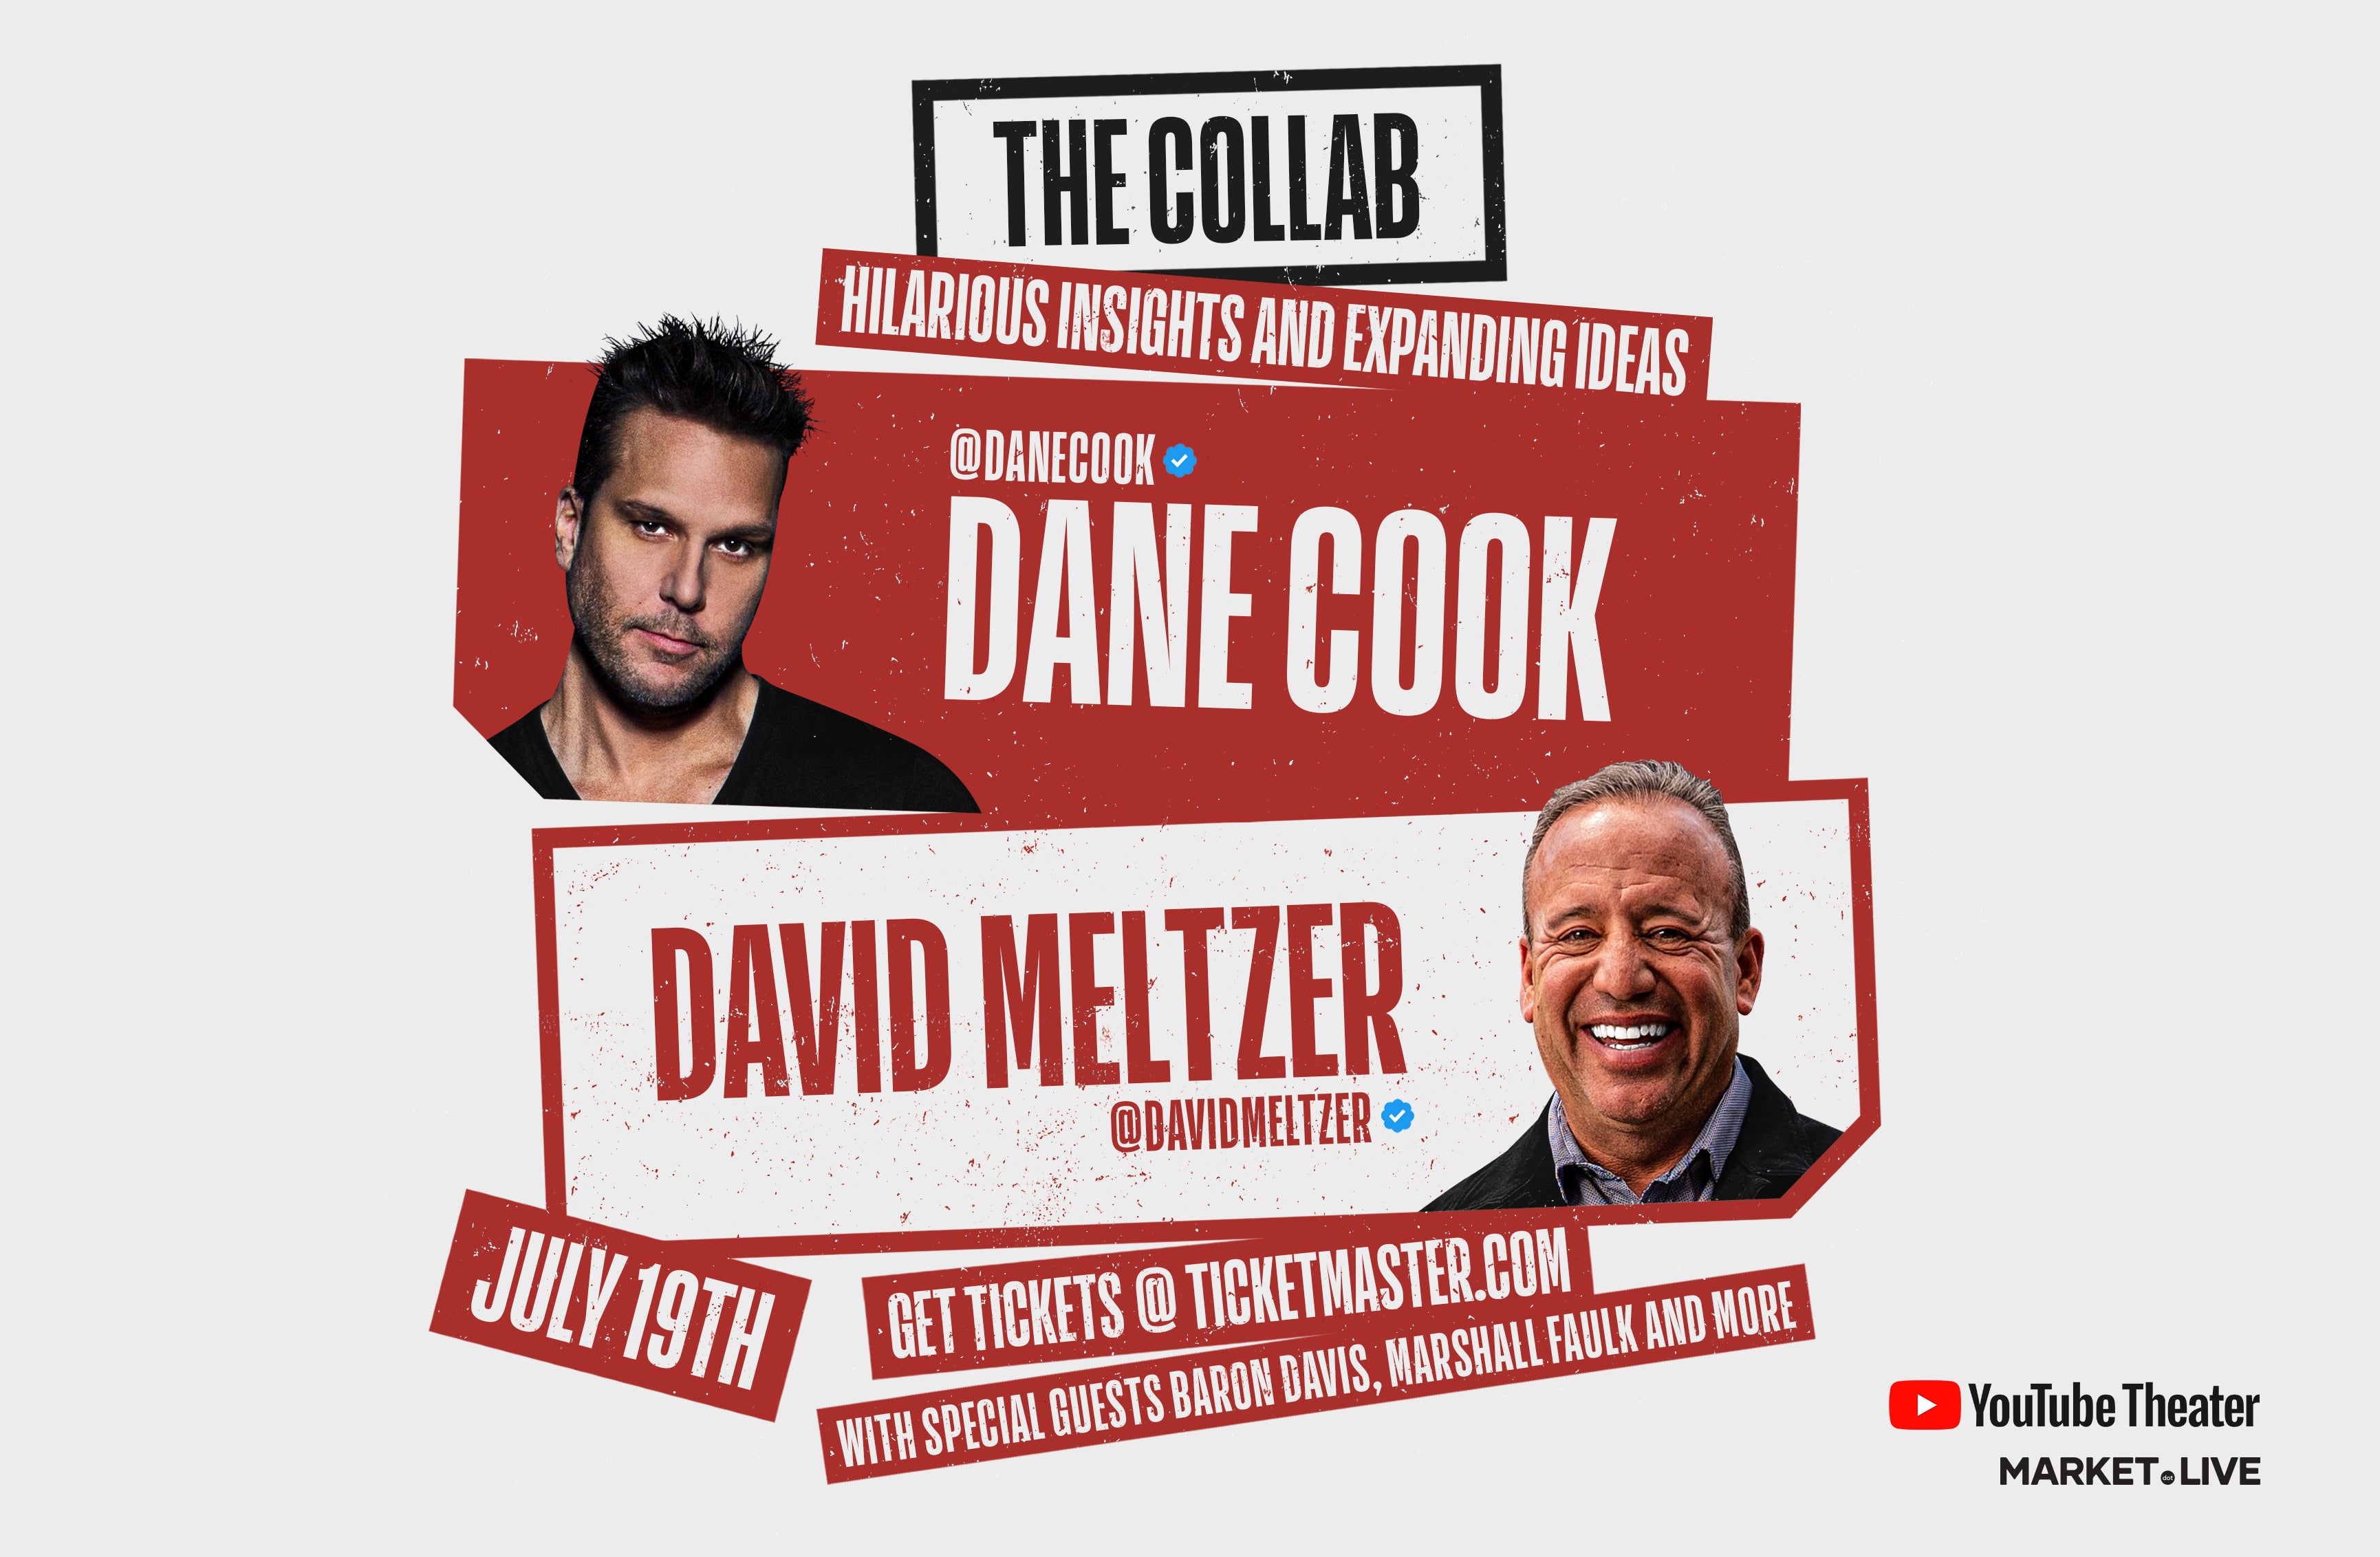 More Info for The Collab featuring Dane Cook and David Meltzer Debuts at YouTube Theater on Friday, July 19th with special guests Baron Davis, Marshall Faulk, and more